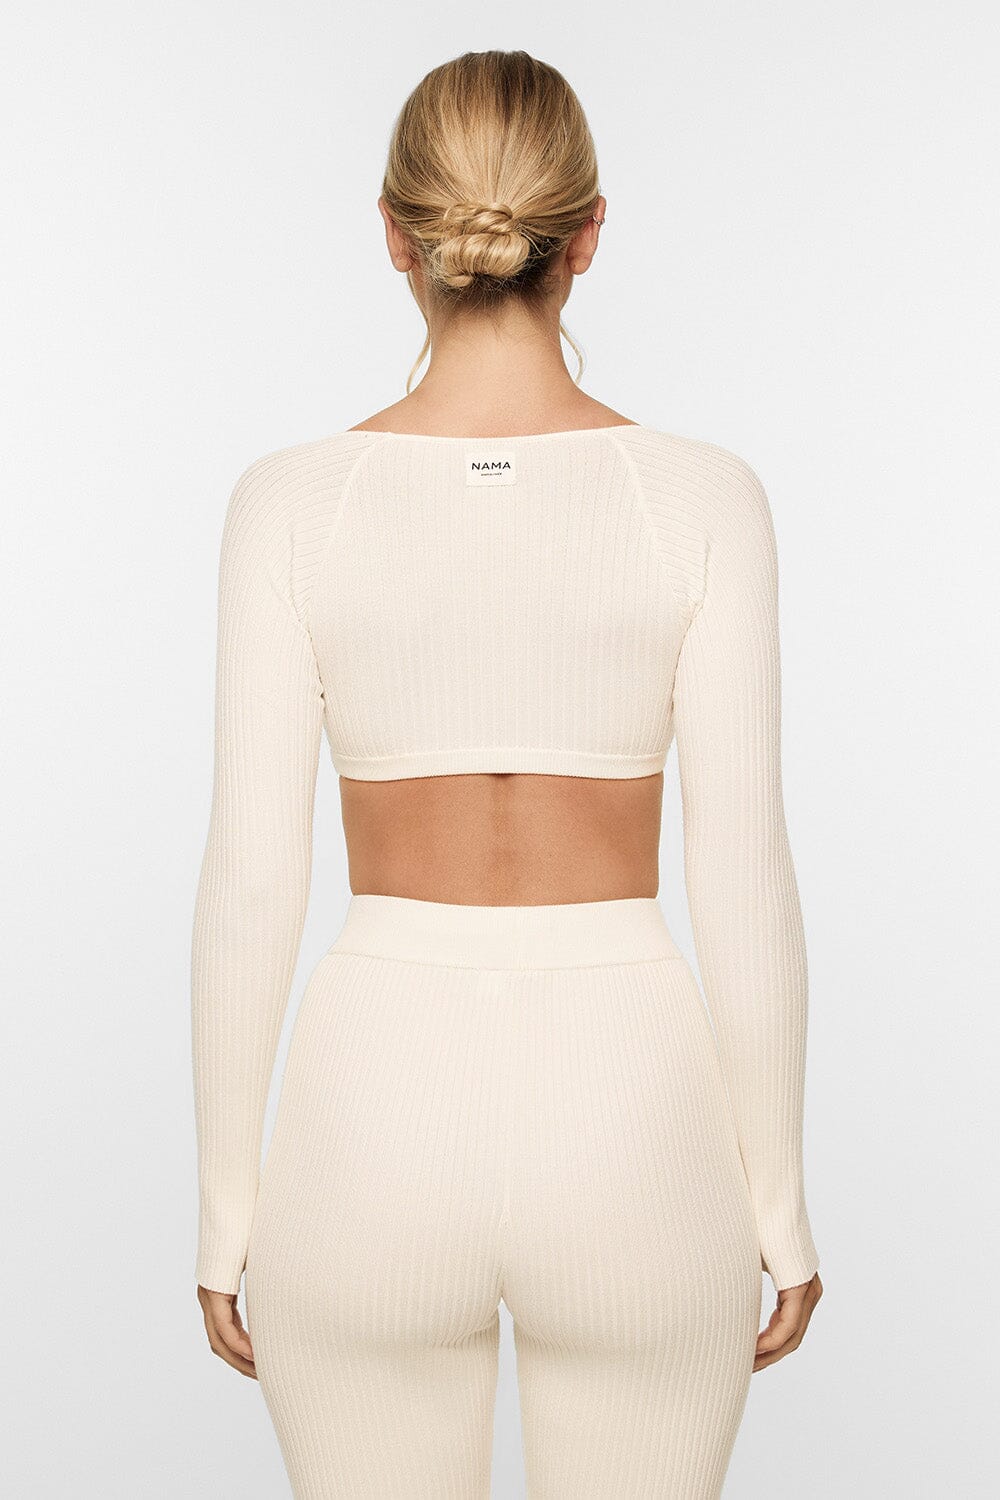 LUXKNIT™ Square Neck Long Sleeve